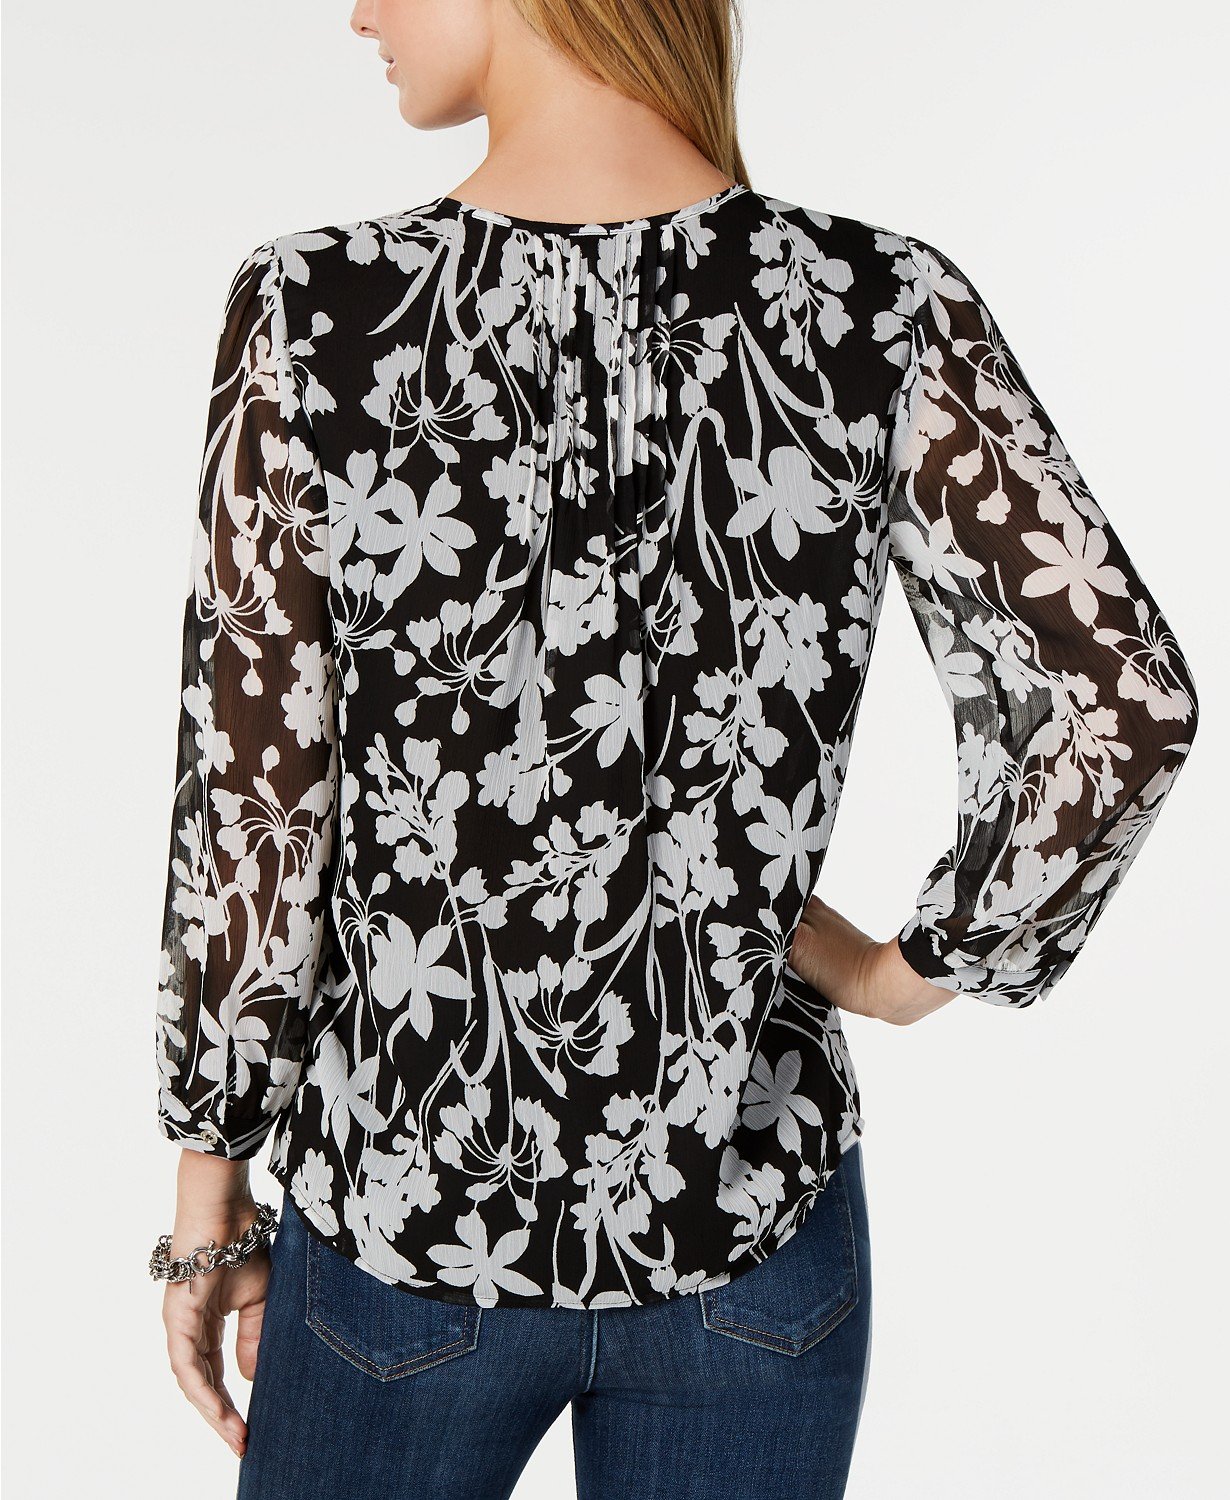 Tommy Hilfiger Printed Pintuck-Pleat Top - TopLine Fashion Lounge